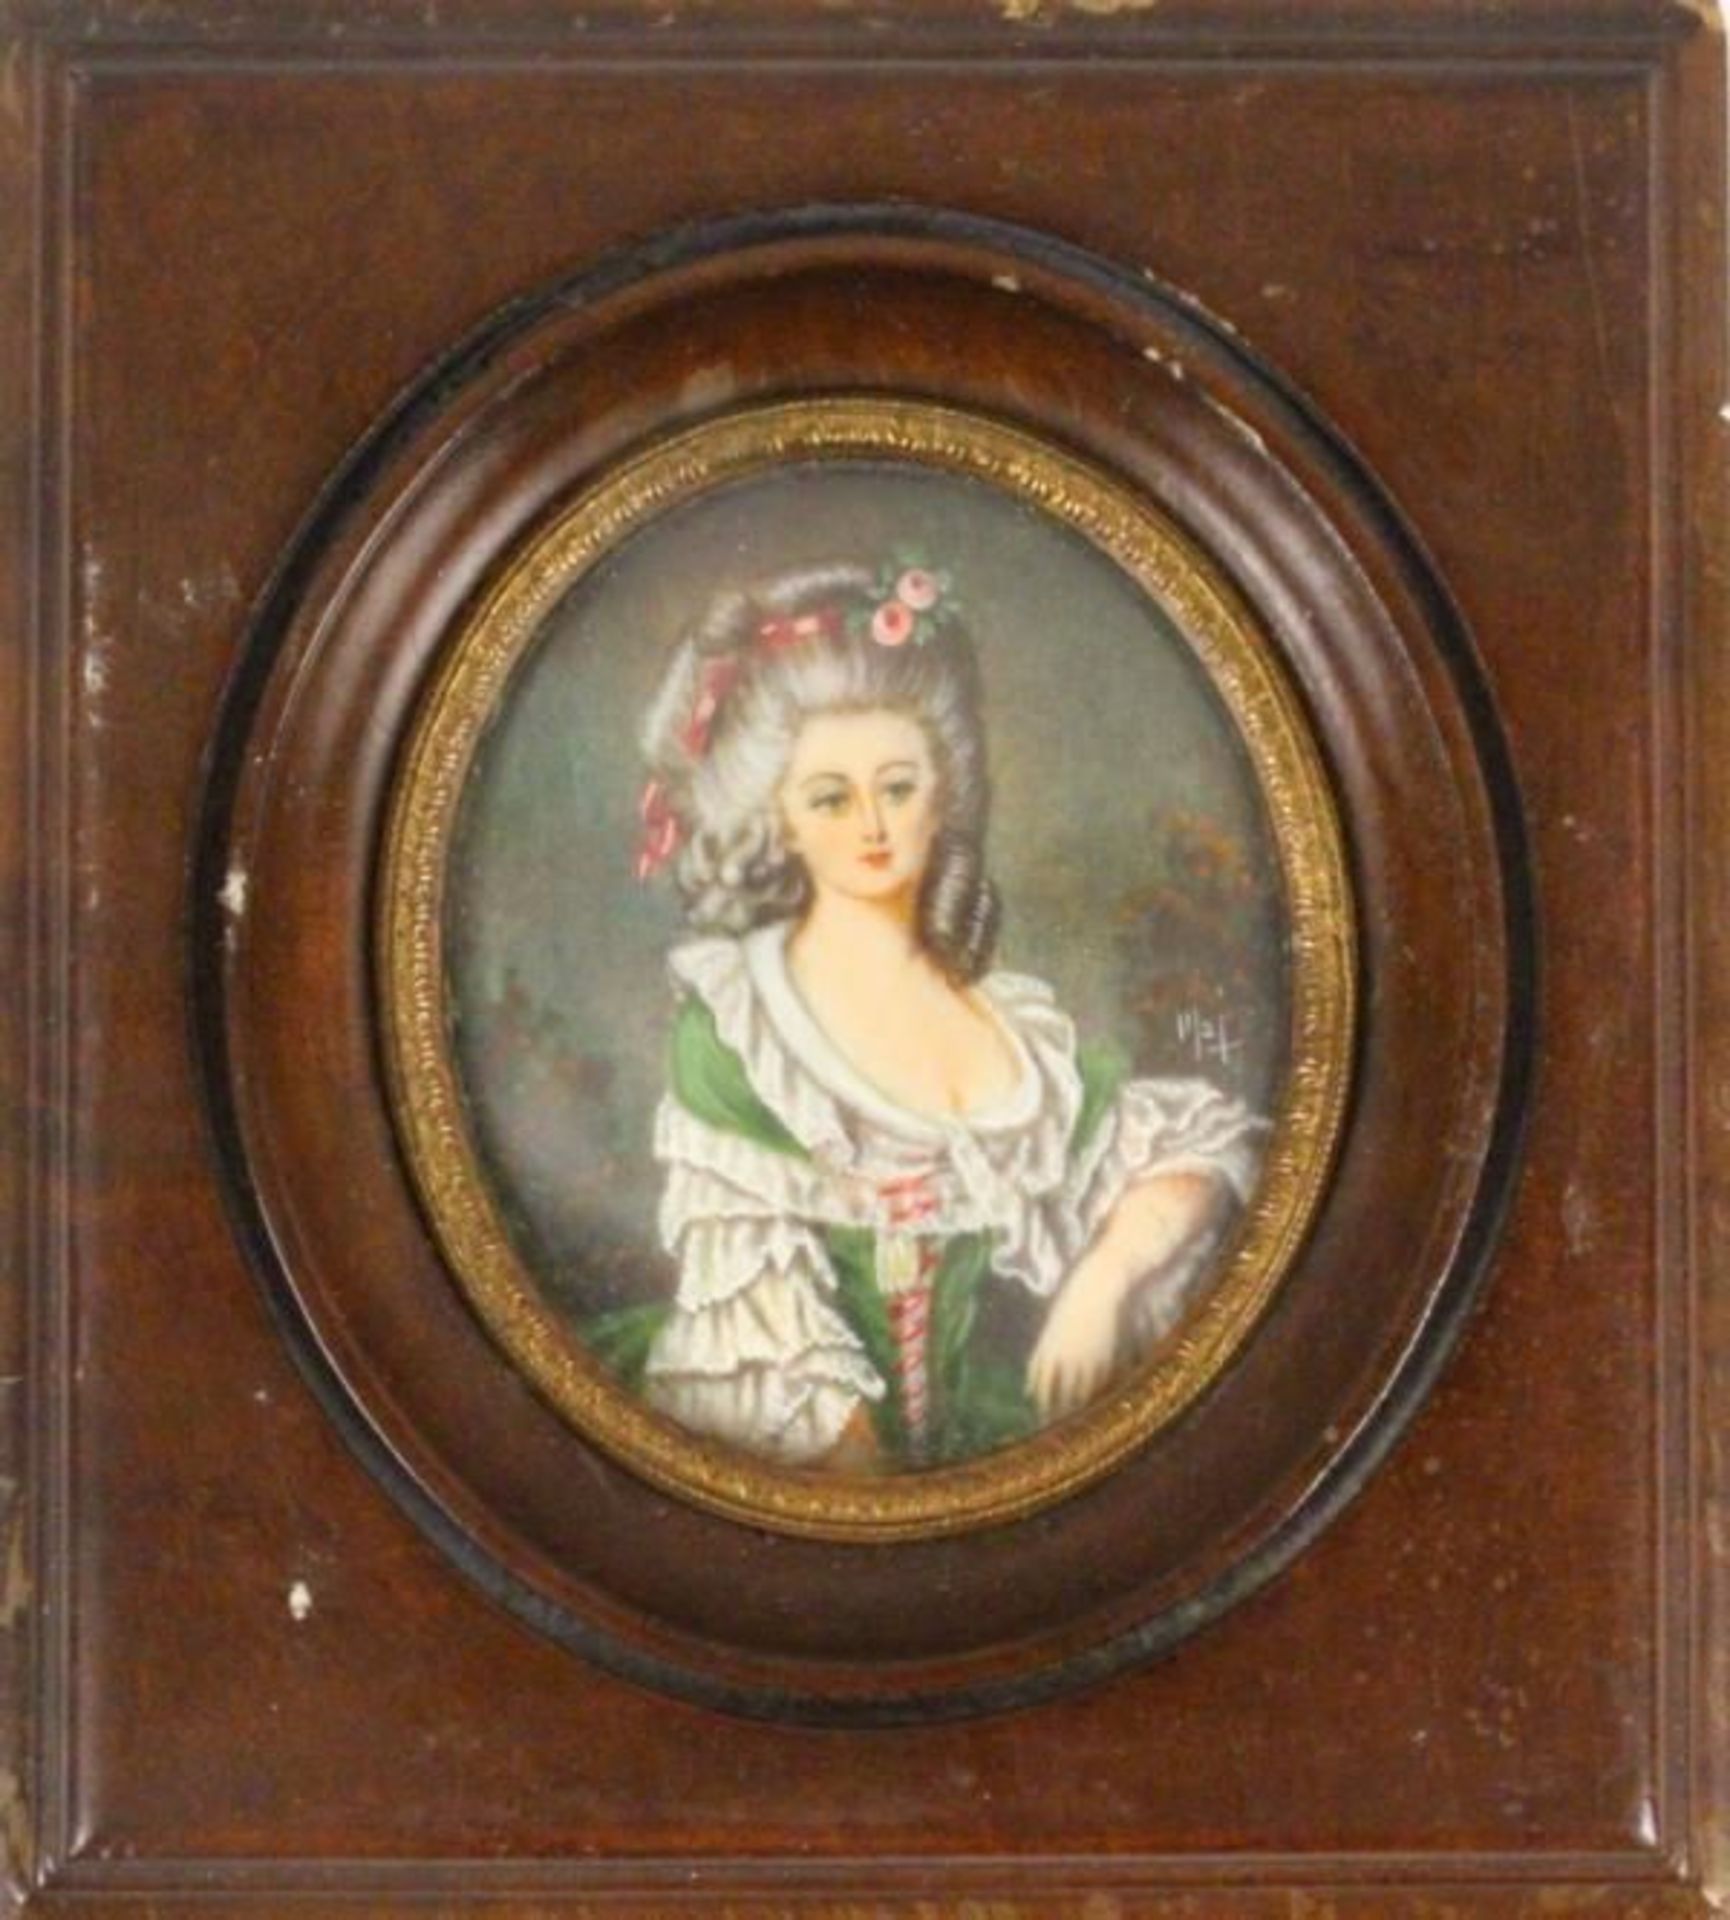 A MINIATURE of an elegant lady de Rococo, colourful painted on ivory, oval, 6.5x5.5cm, with frame: